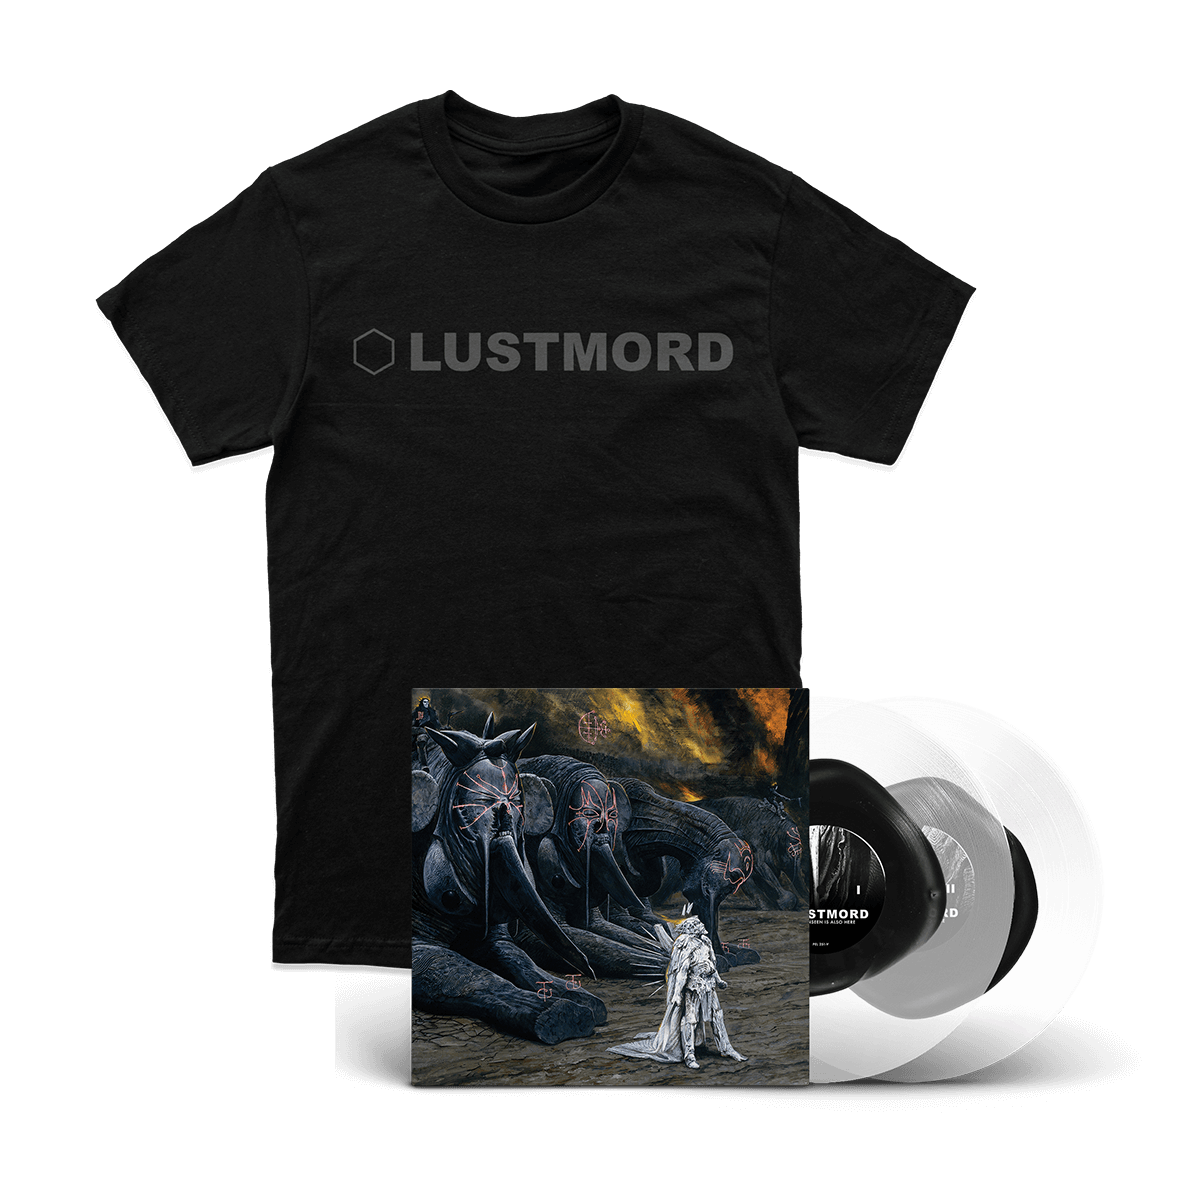 LUSTMORD // MUCH UNSEEN IS ALSO HERE - 2LP VINYL + T-SHIRT BUNDLE